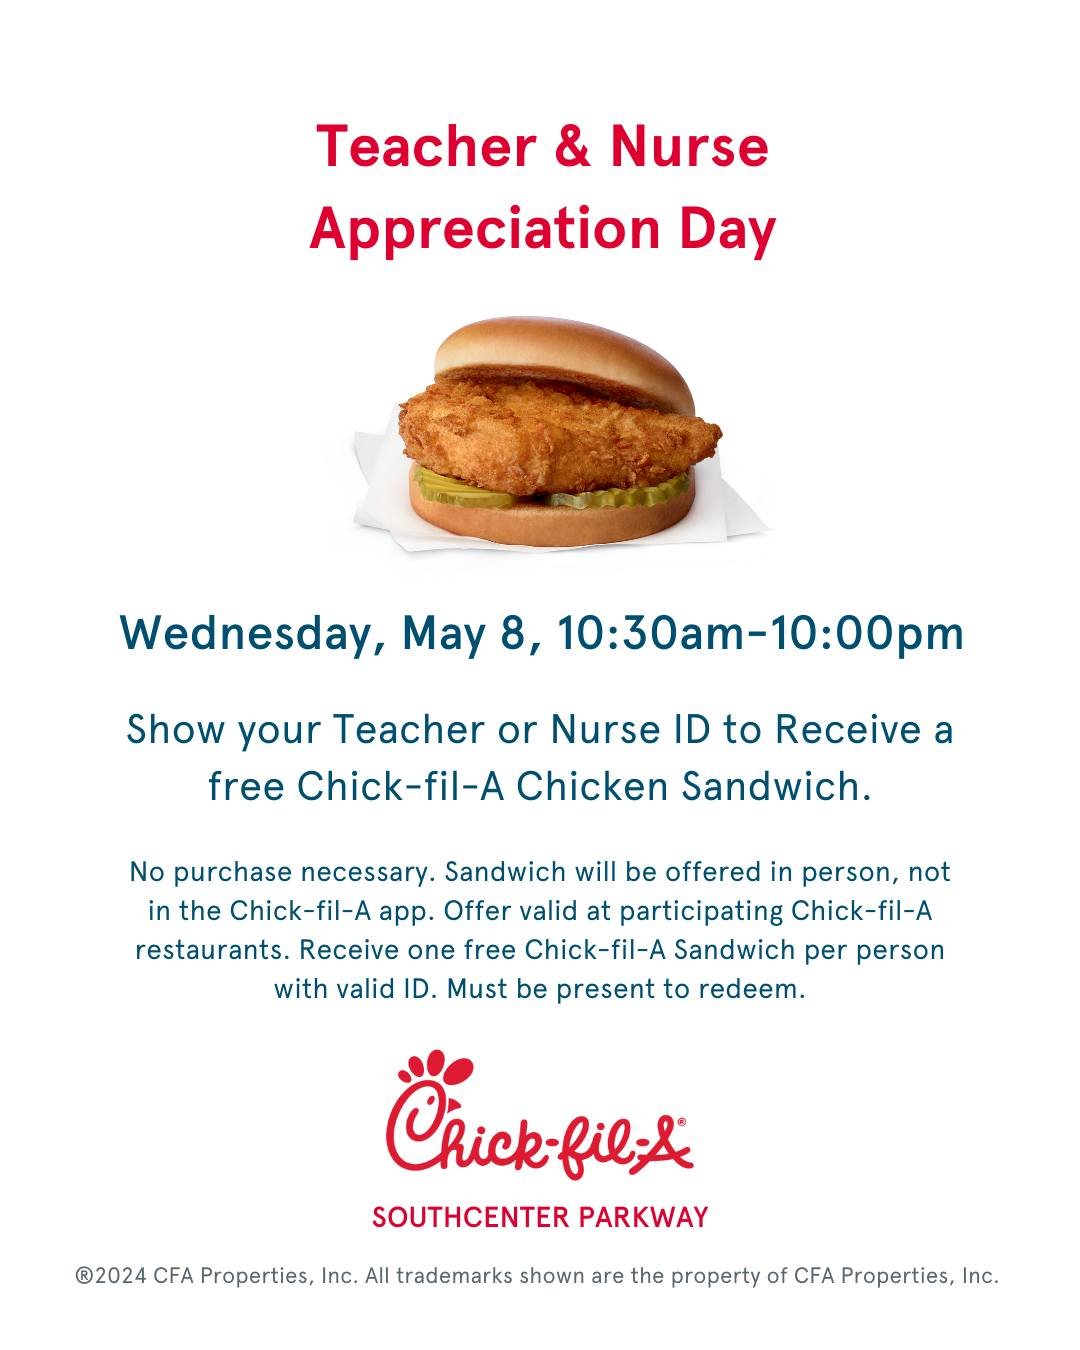 May 8 10:30am-10:00pm
Teacher &amp; Nurse Appreciation Day 🍎🏥

We appreciate everything our teachers and nurses do every day! 

Visit us at the restaurant and show your valid Teacher or Nurse ID for a Free Original Chicken Sandwich. 

Must be prese